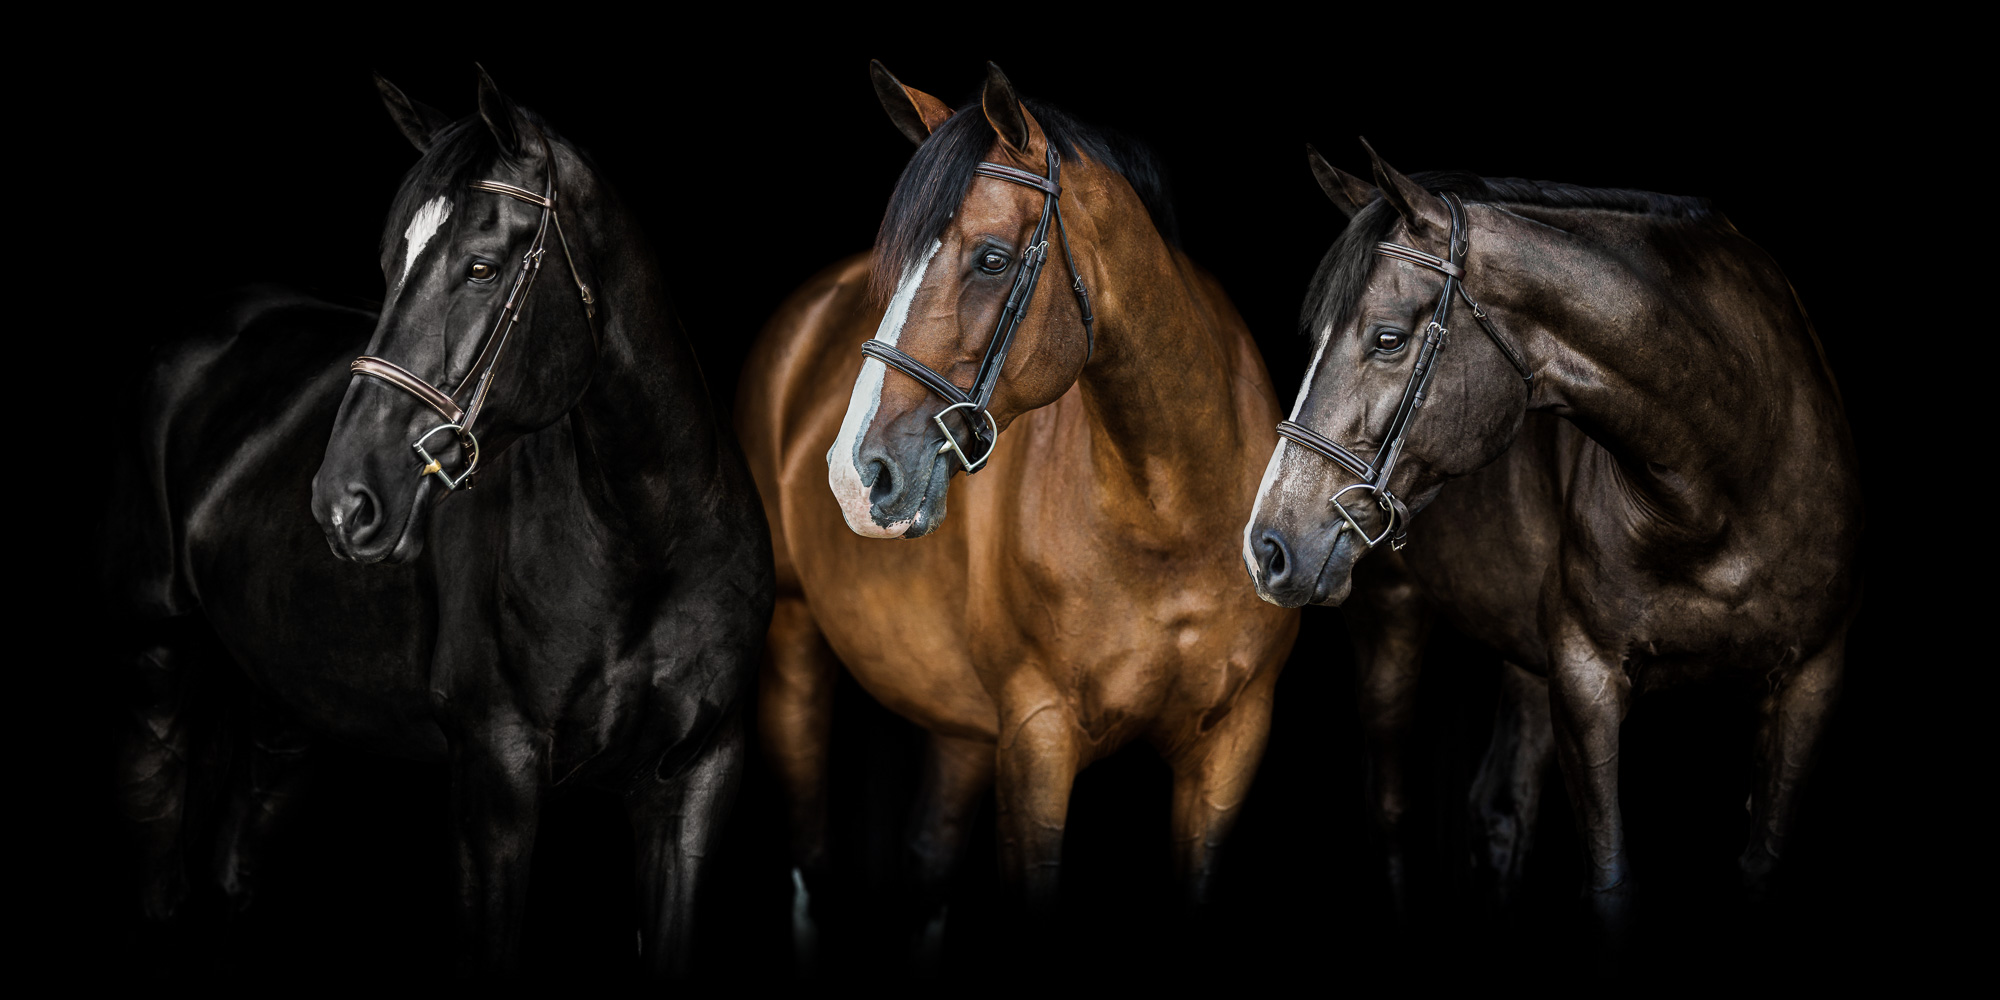 three mares side by side on black background